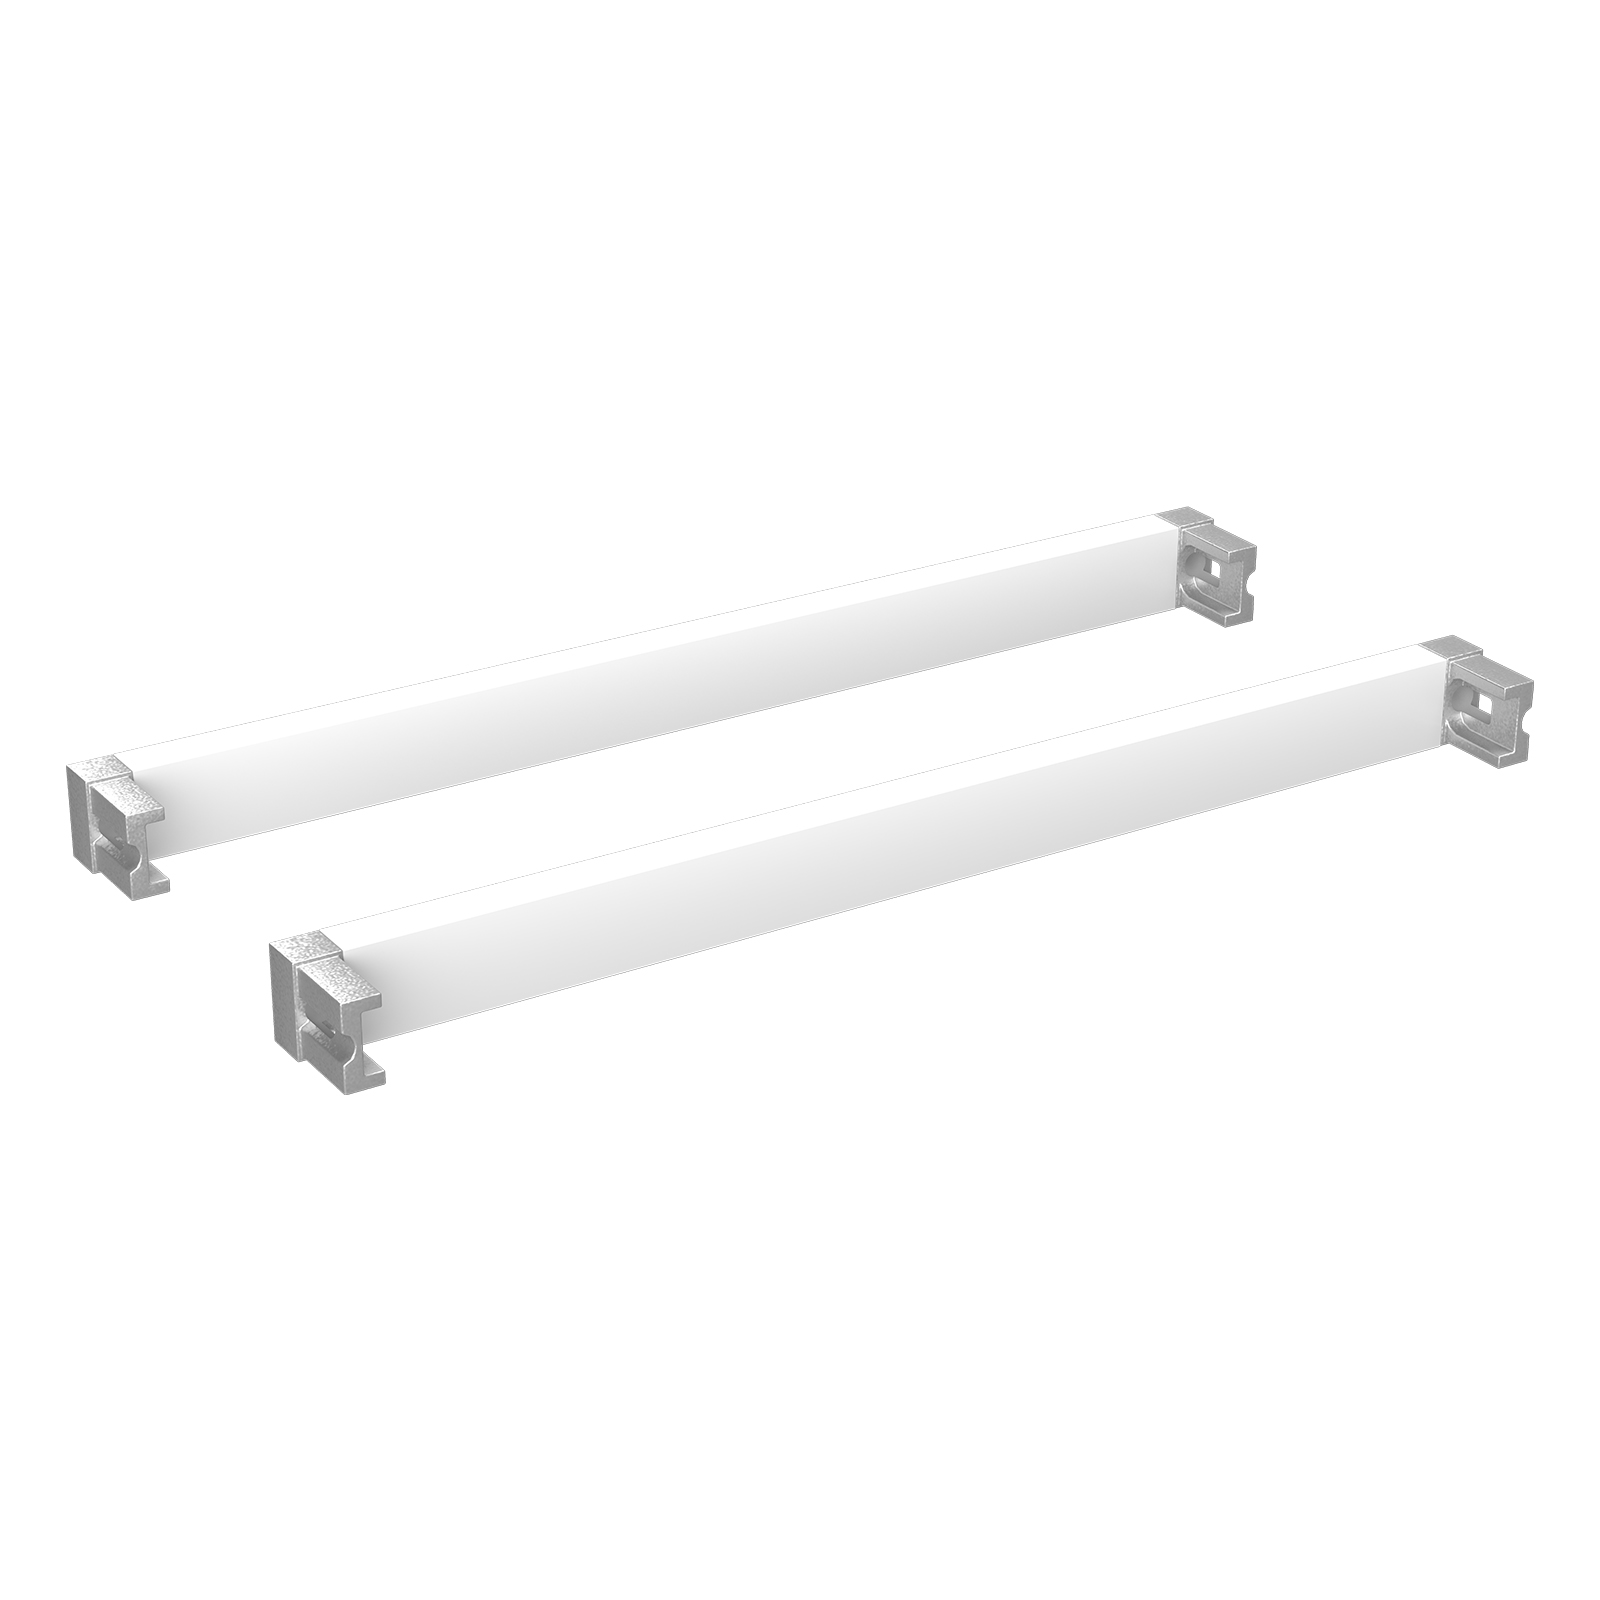 Home Solutions 435mm Cross Bars & L-Connector White